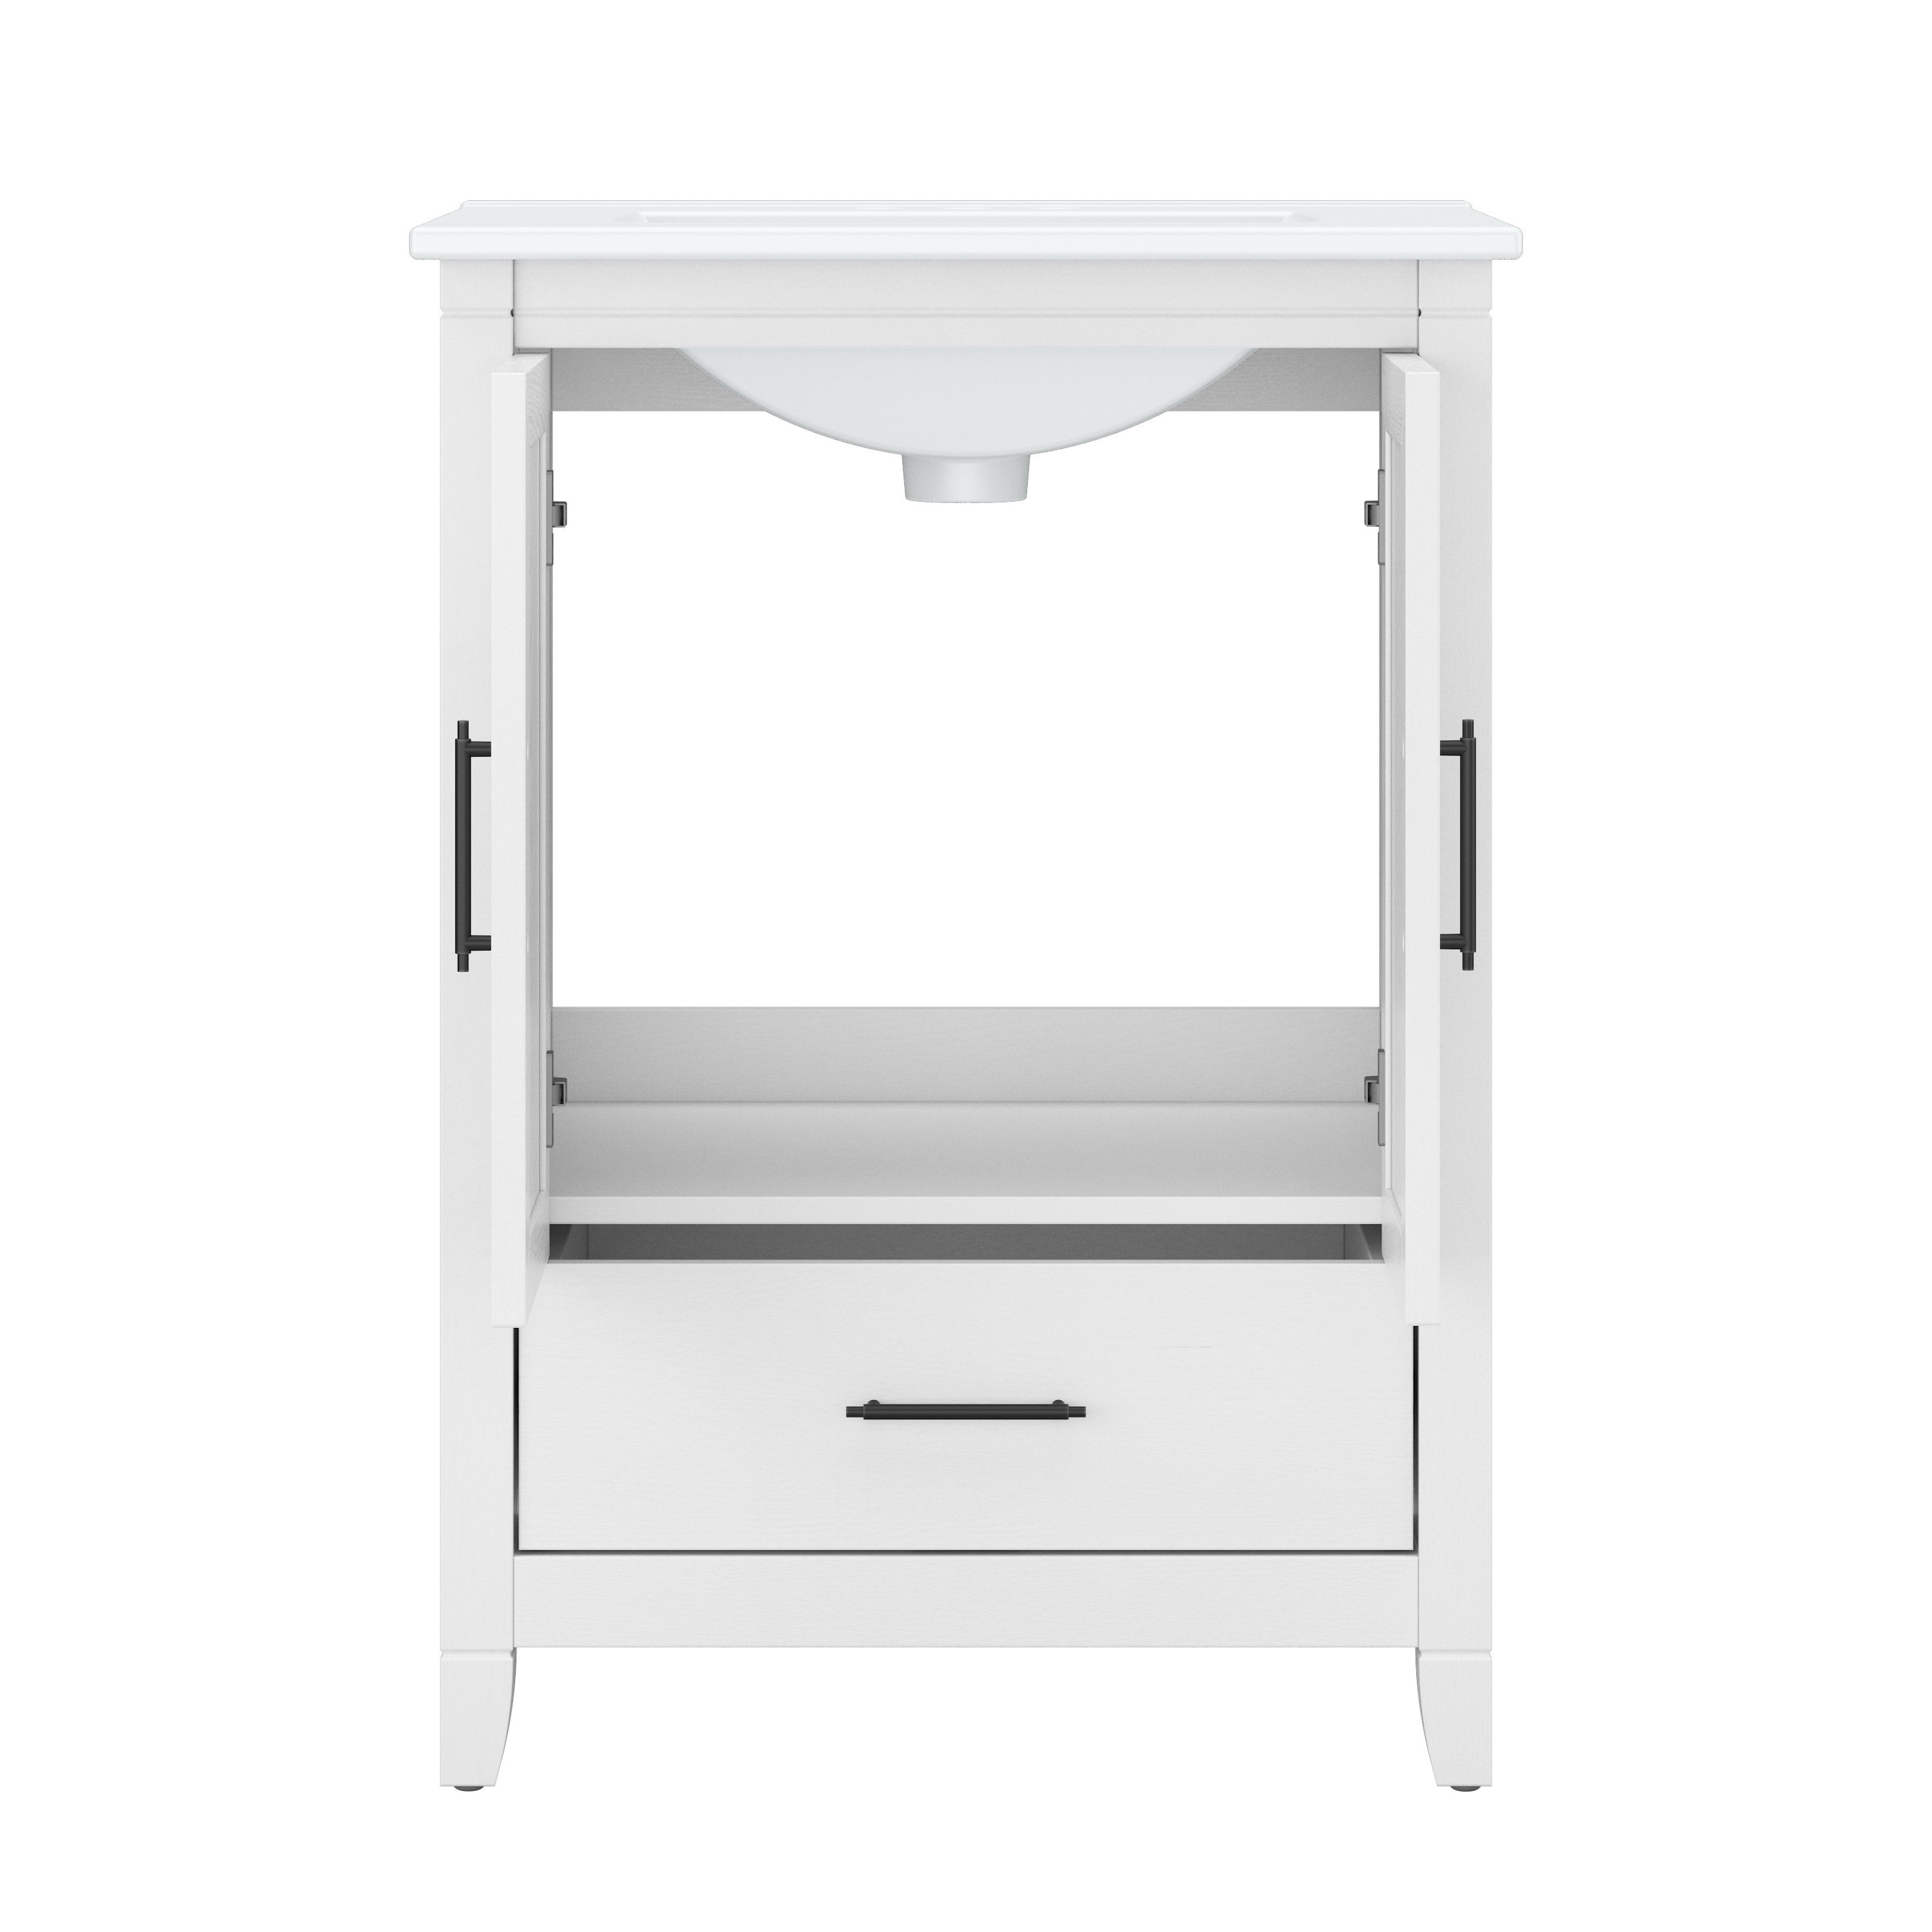 Shop Bush Furniture Key West 64W Double Vanity Set with Sinks and Medicine Cabinets 04 KWS042WAS #color_white ash